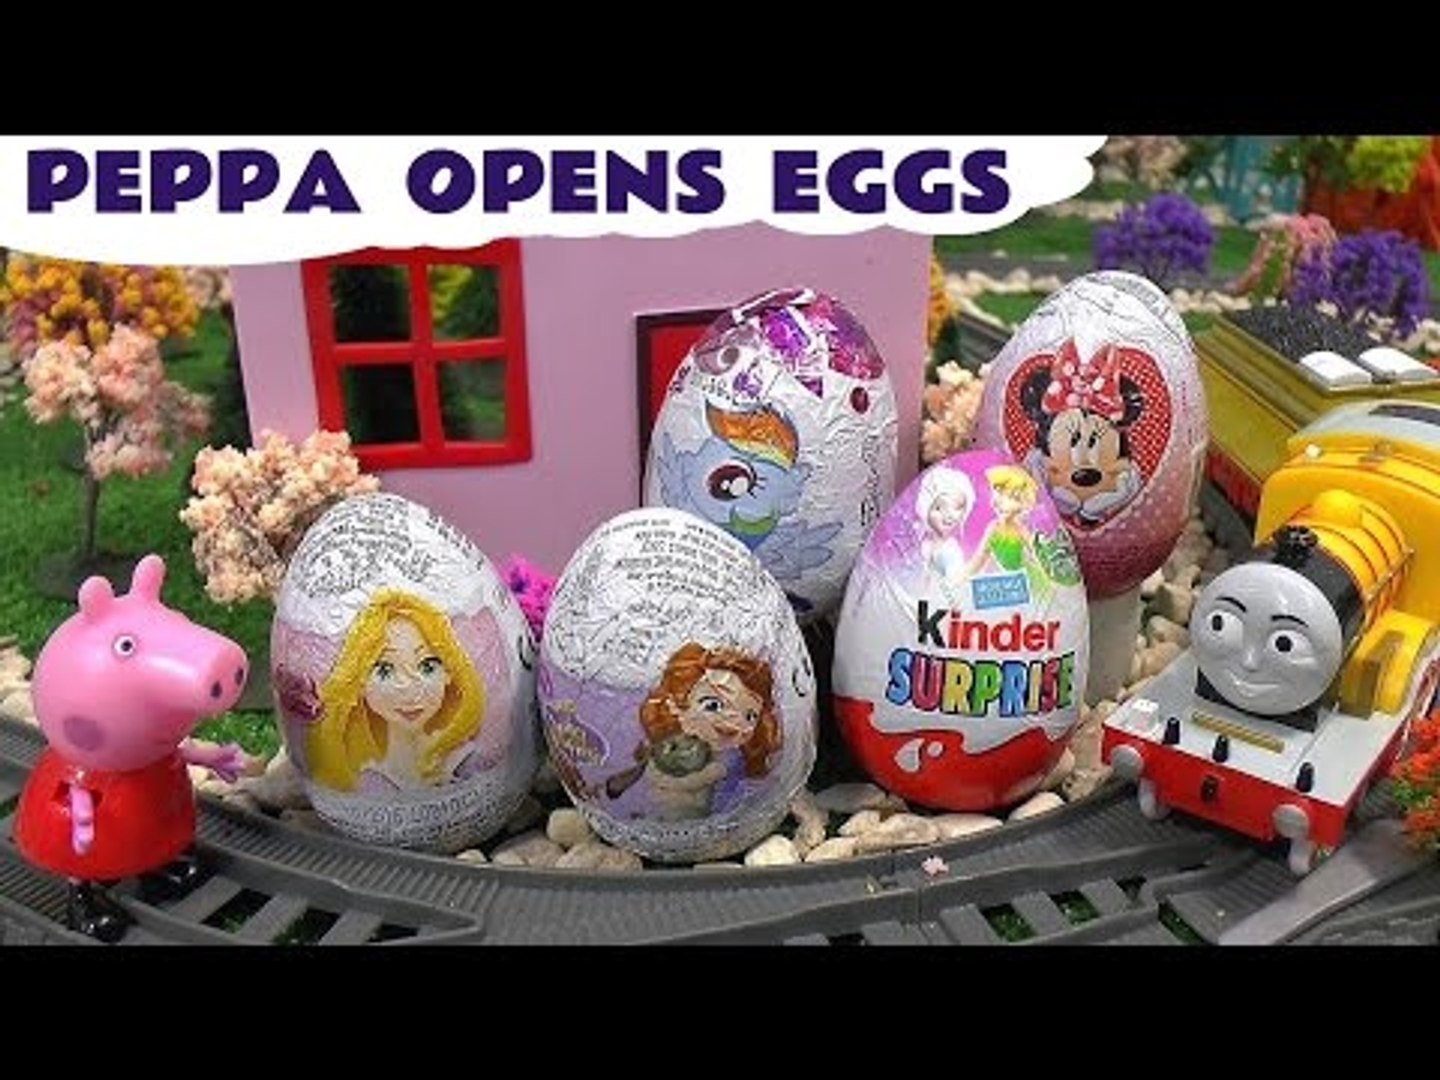 Play Doh Cans Surprise Eggs Peppa Pig doug toys Pepa Egg - Dailymotion Video